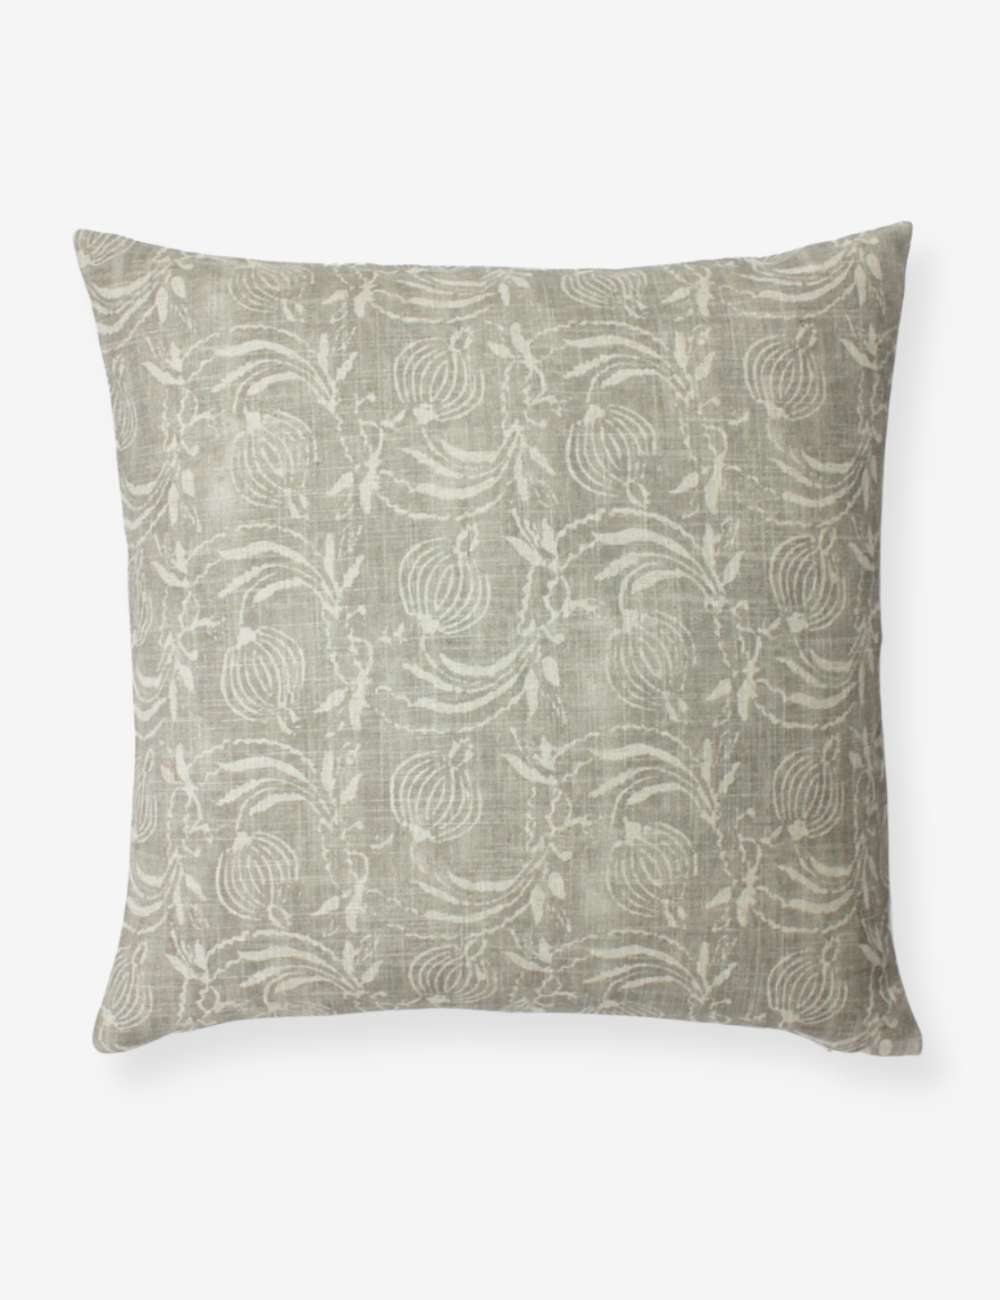 Square brown grey cushion cover with a subtle block print design running across the front. 